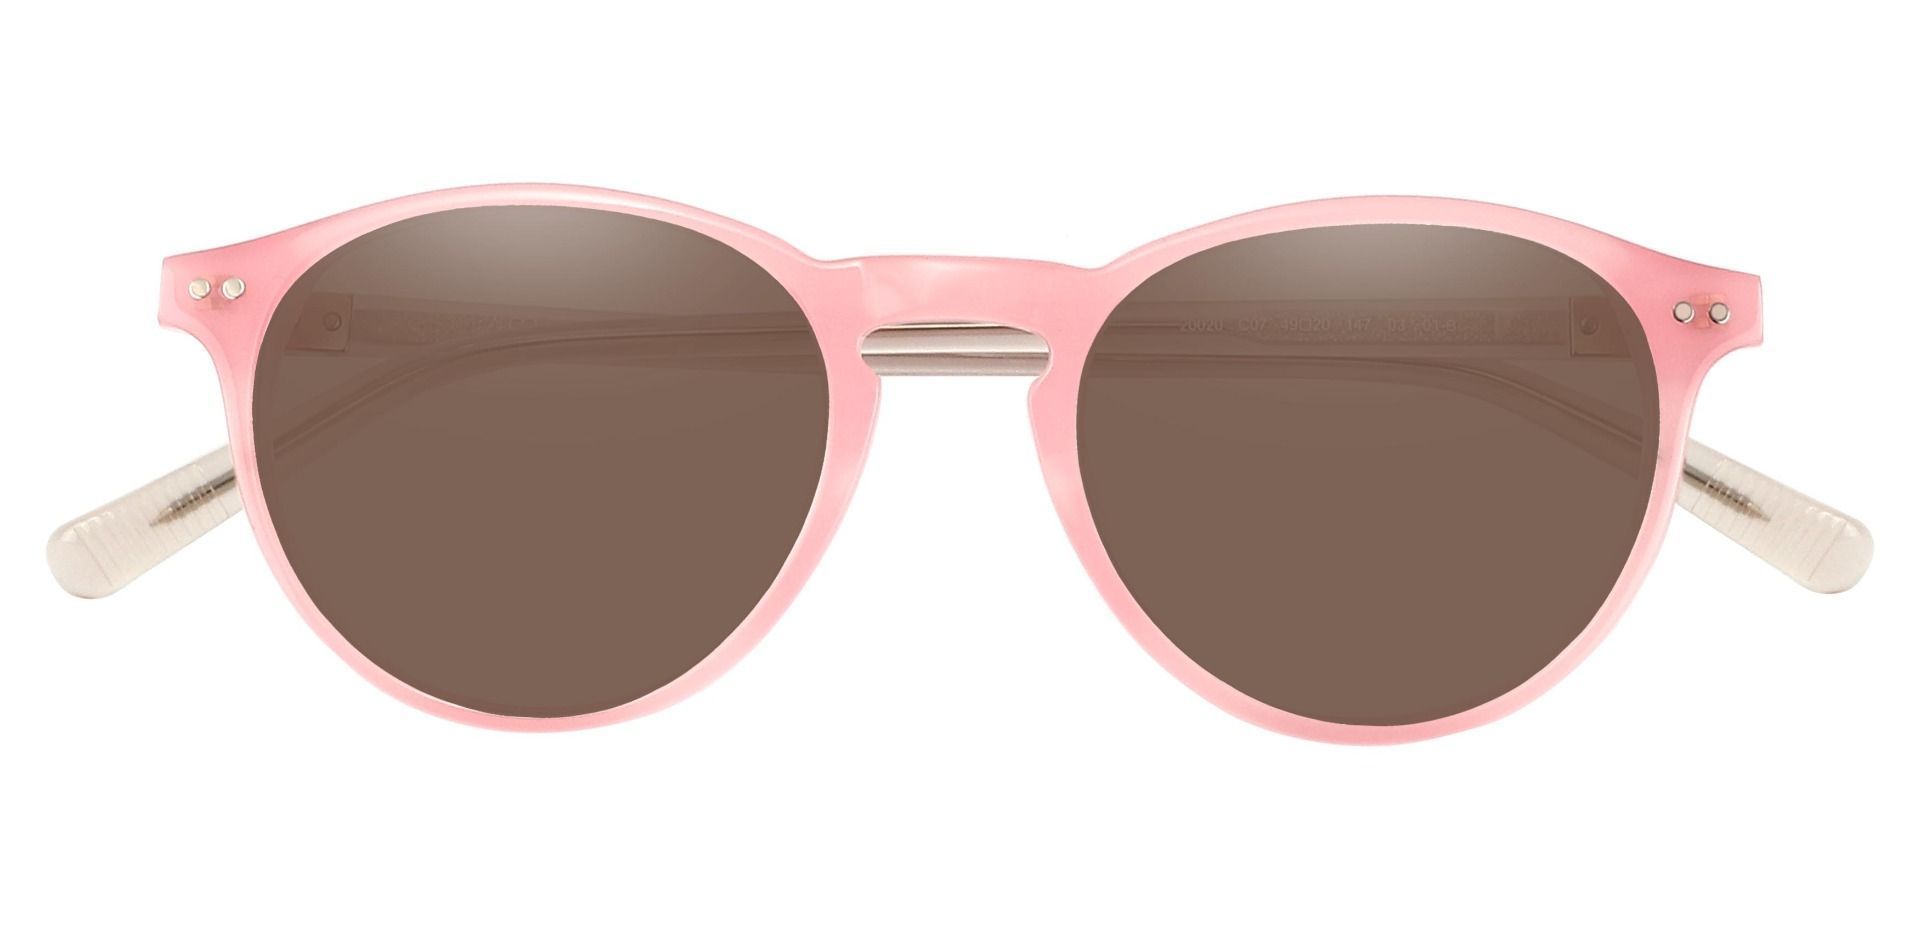 Monarch Oval Non-Rx Sunglasses - Pink Frame With Brown Lenses